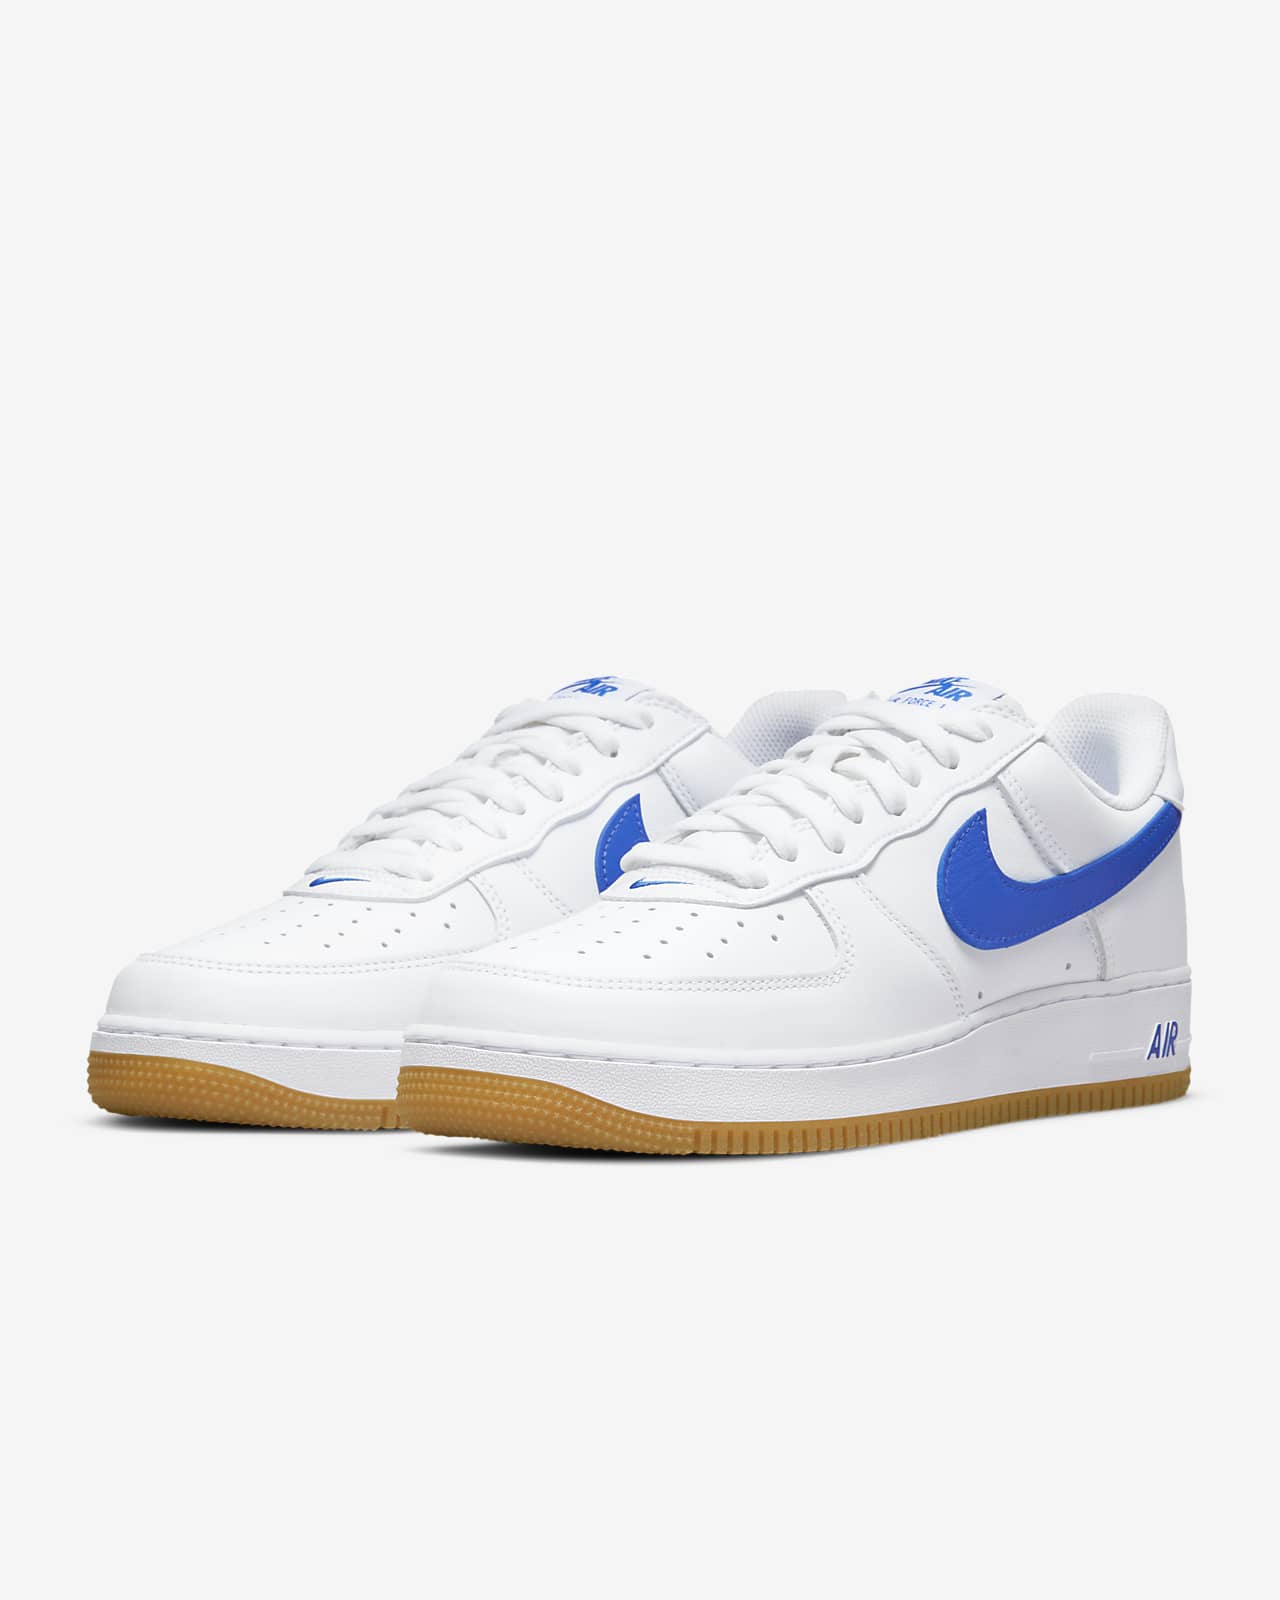 Nike Air Force 1 Low Retro in Blue - Size 7